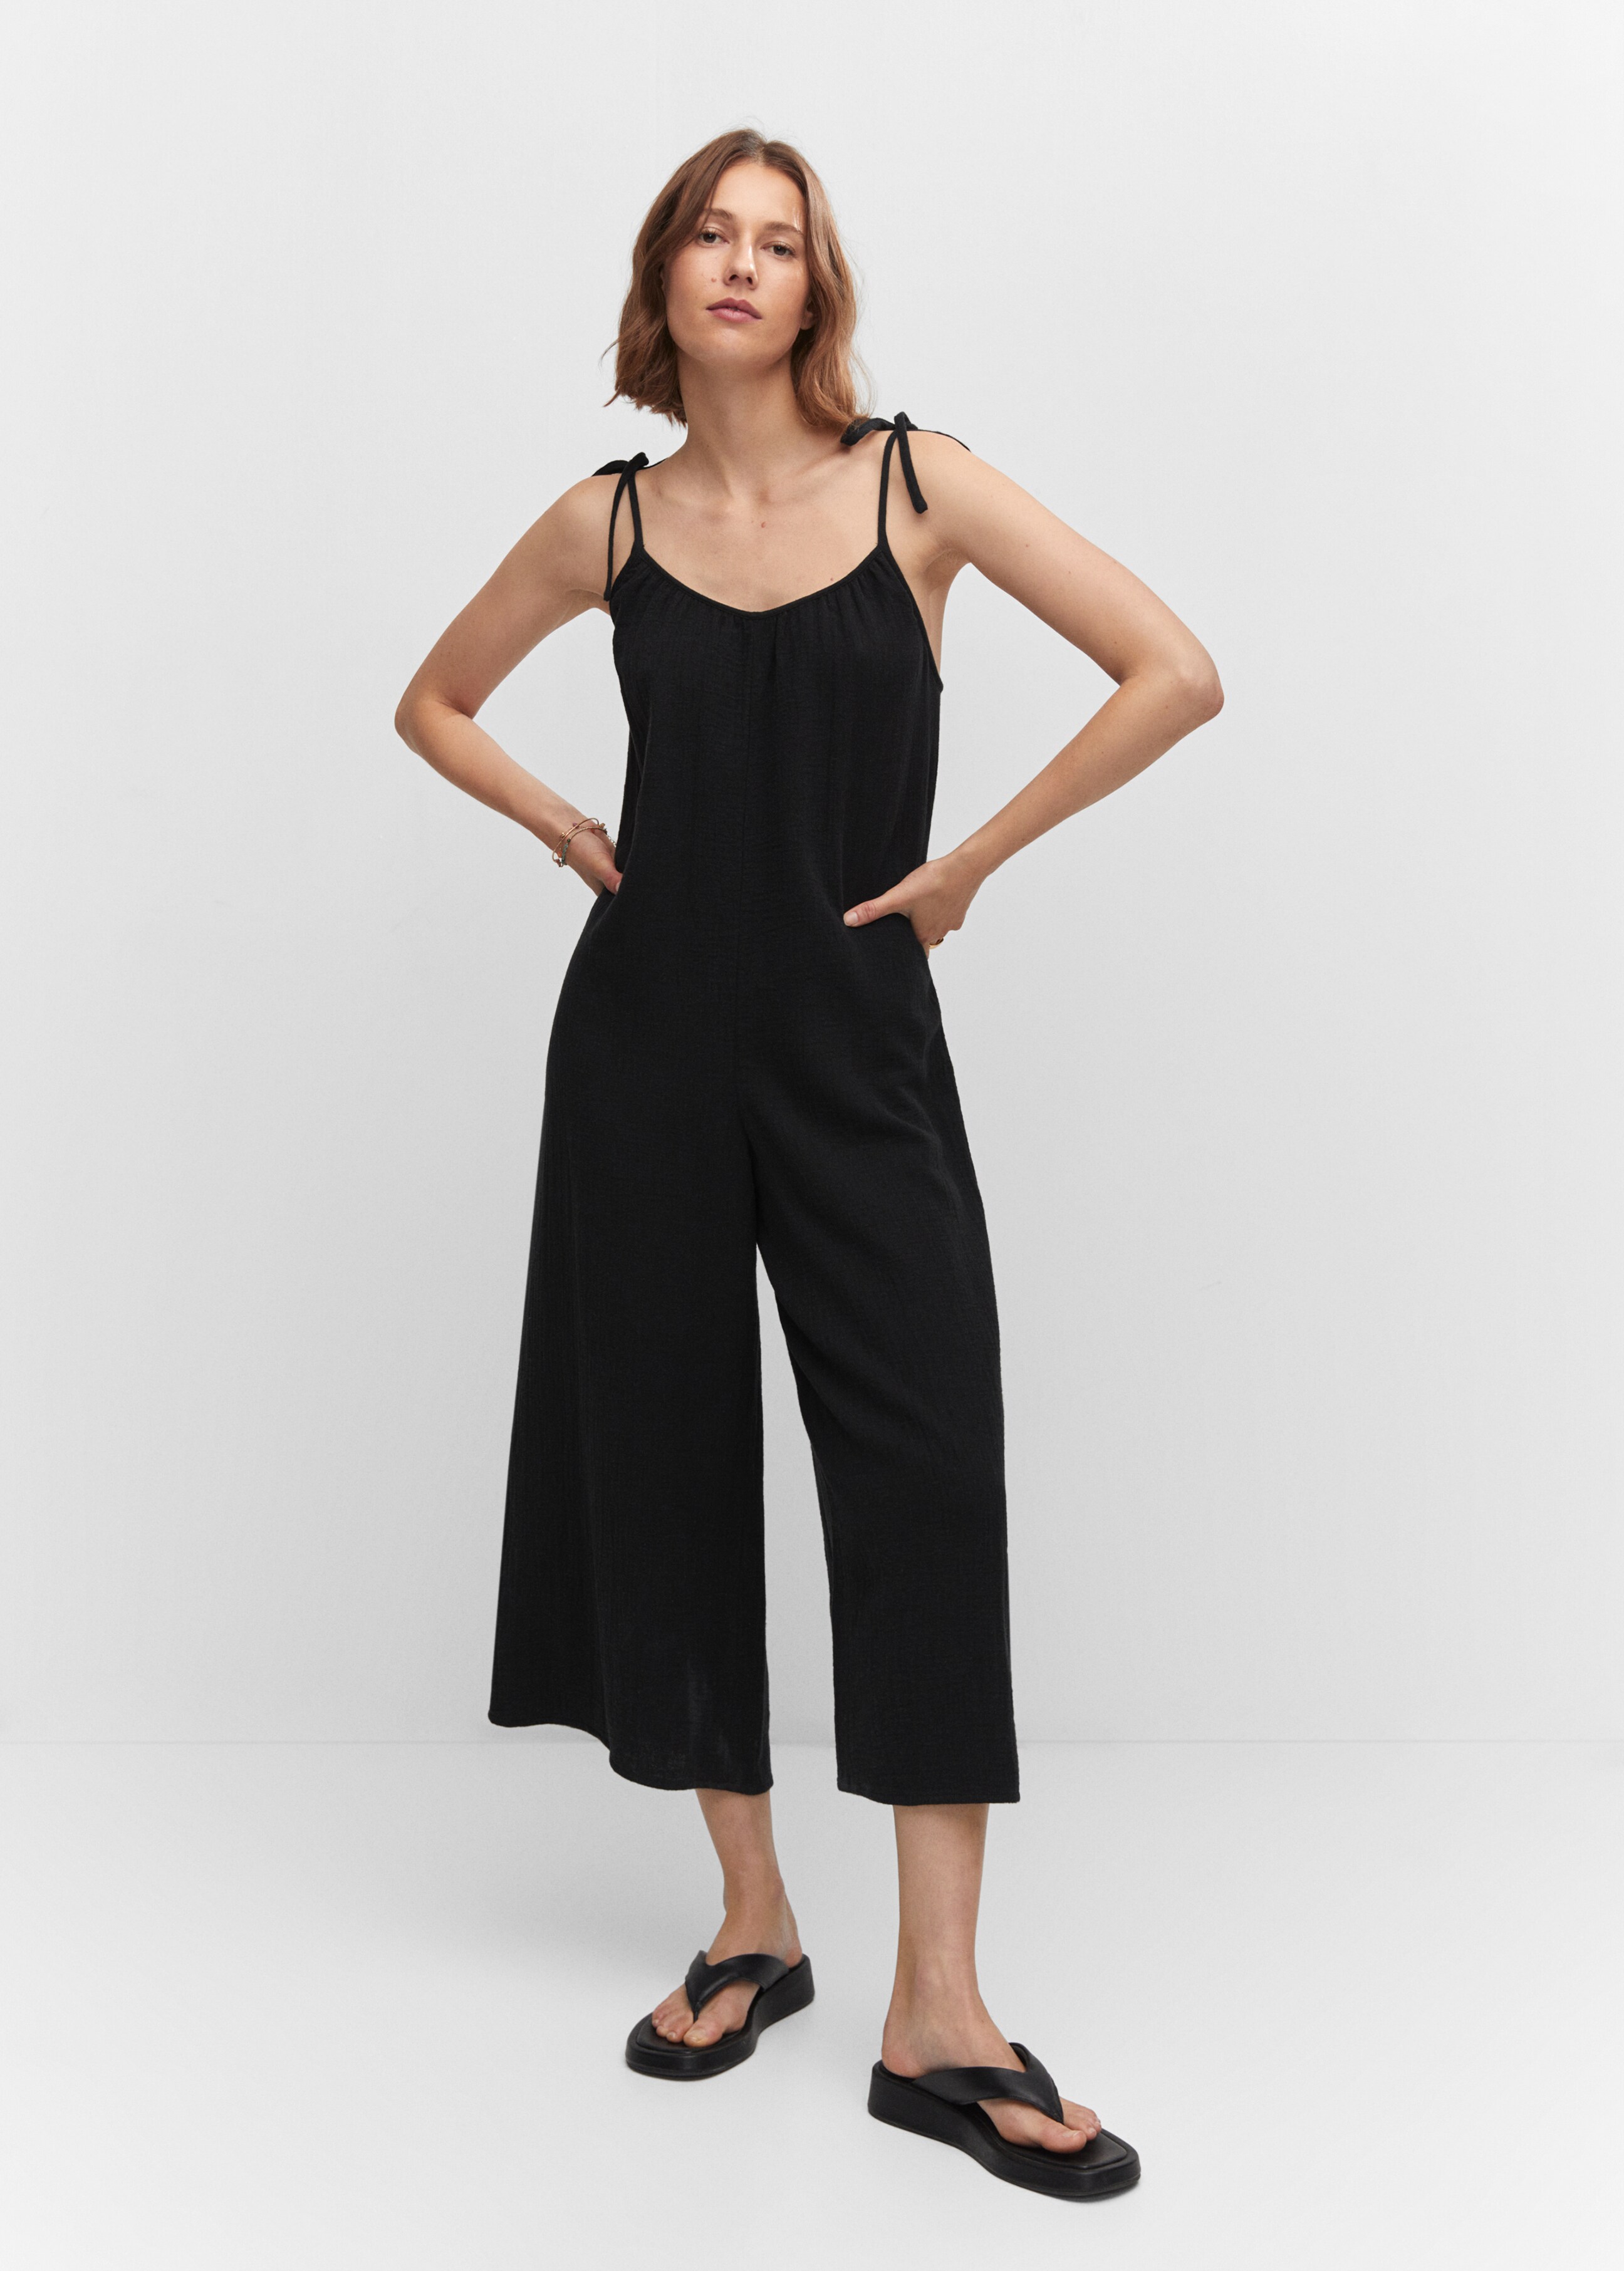 Textured jumpsuit with bows - General plane